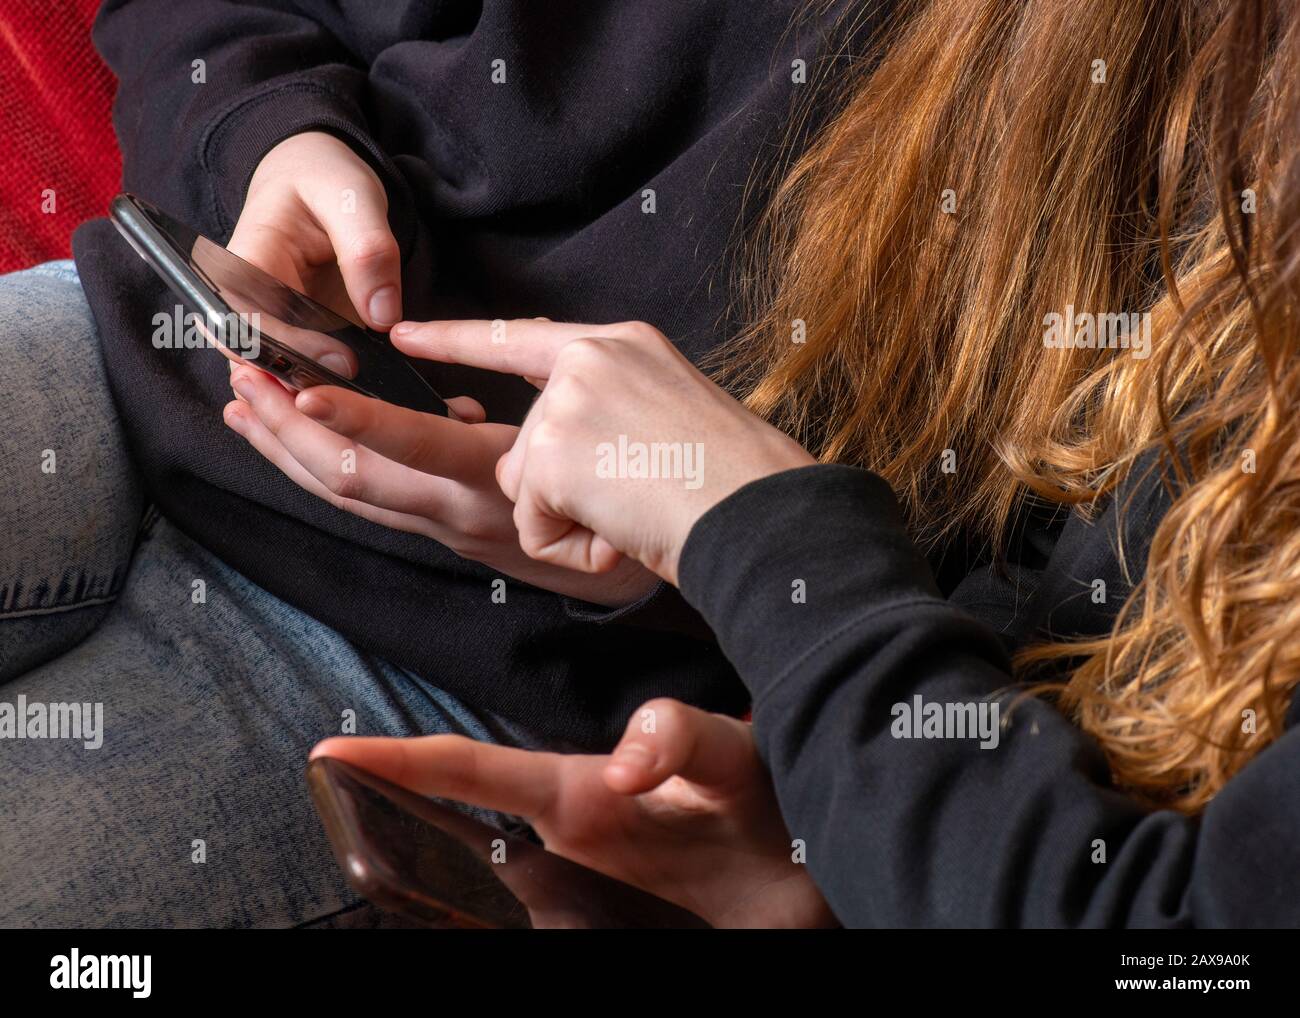 teenagers on their mobile phone sharing information with each other  could be bullying or social media in school sweatshirts  copy space above Stock Photo